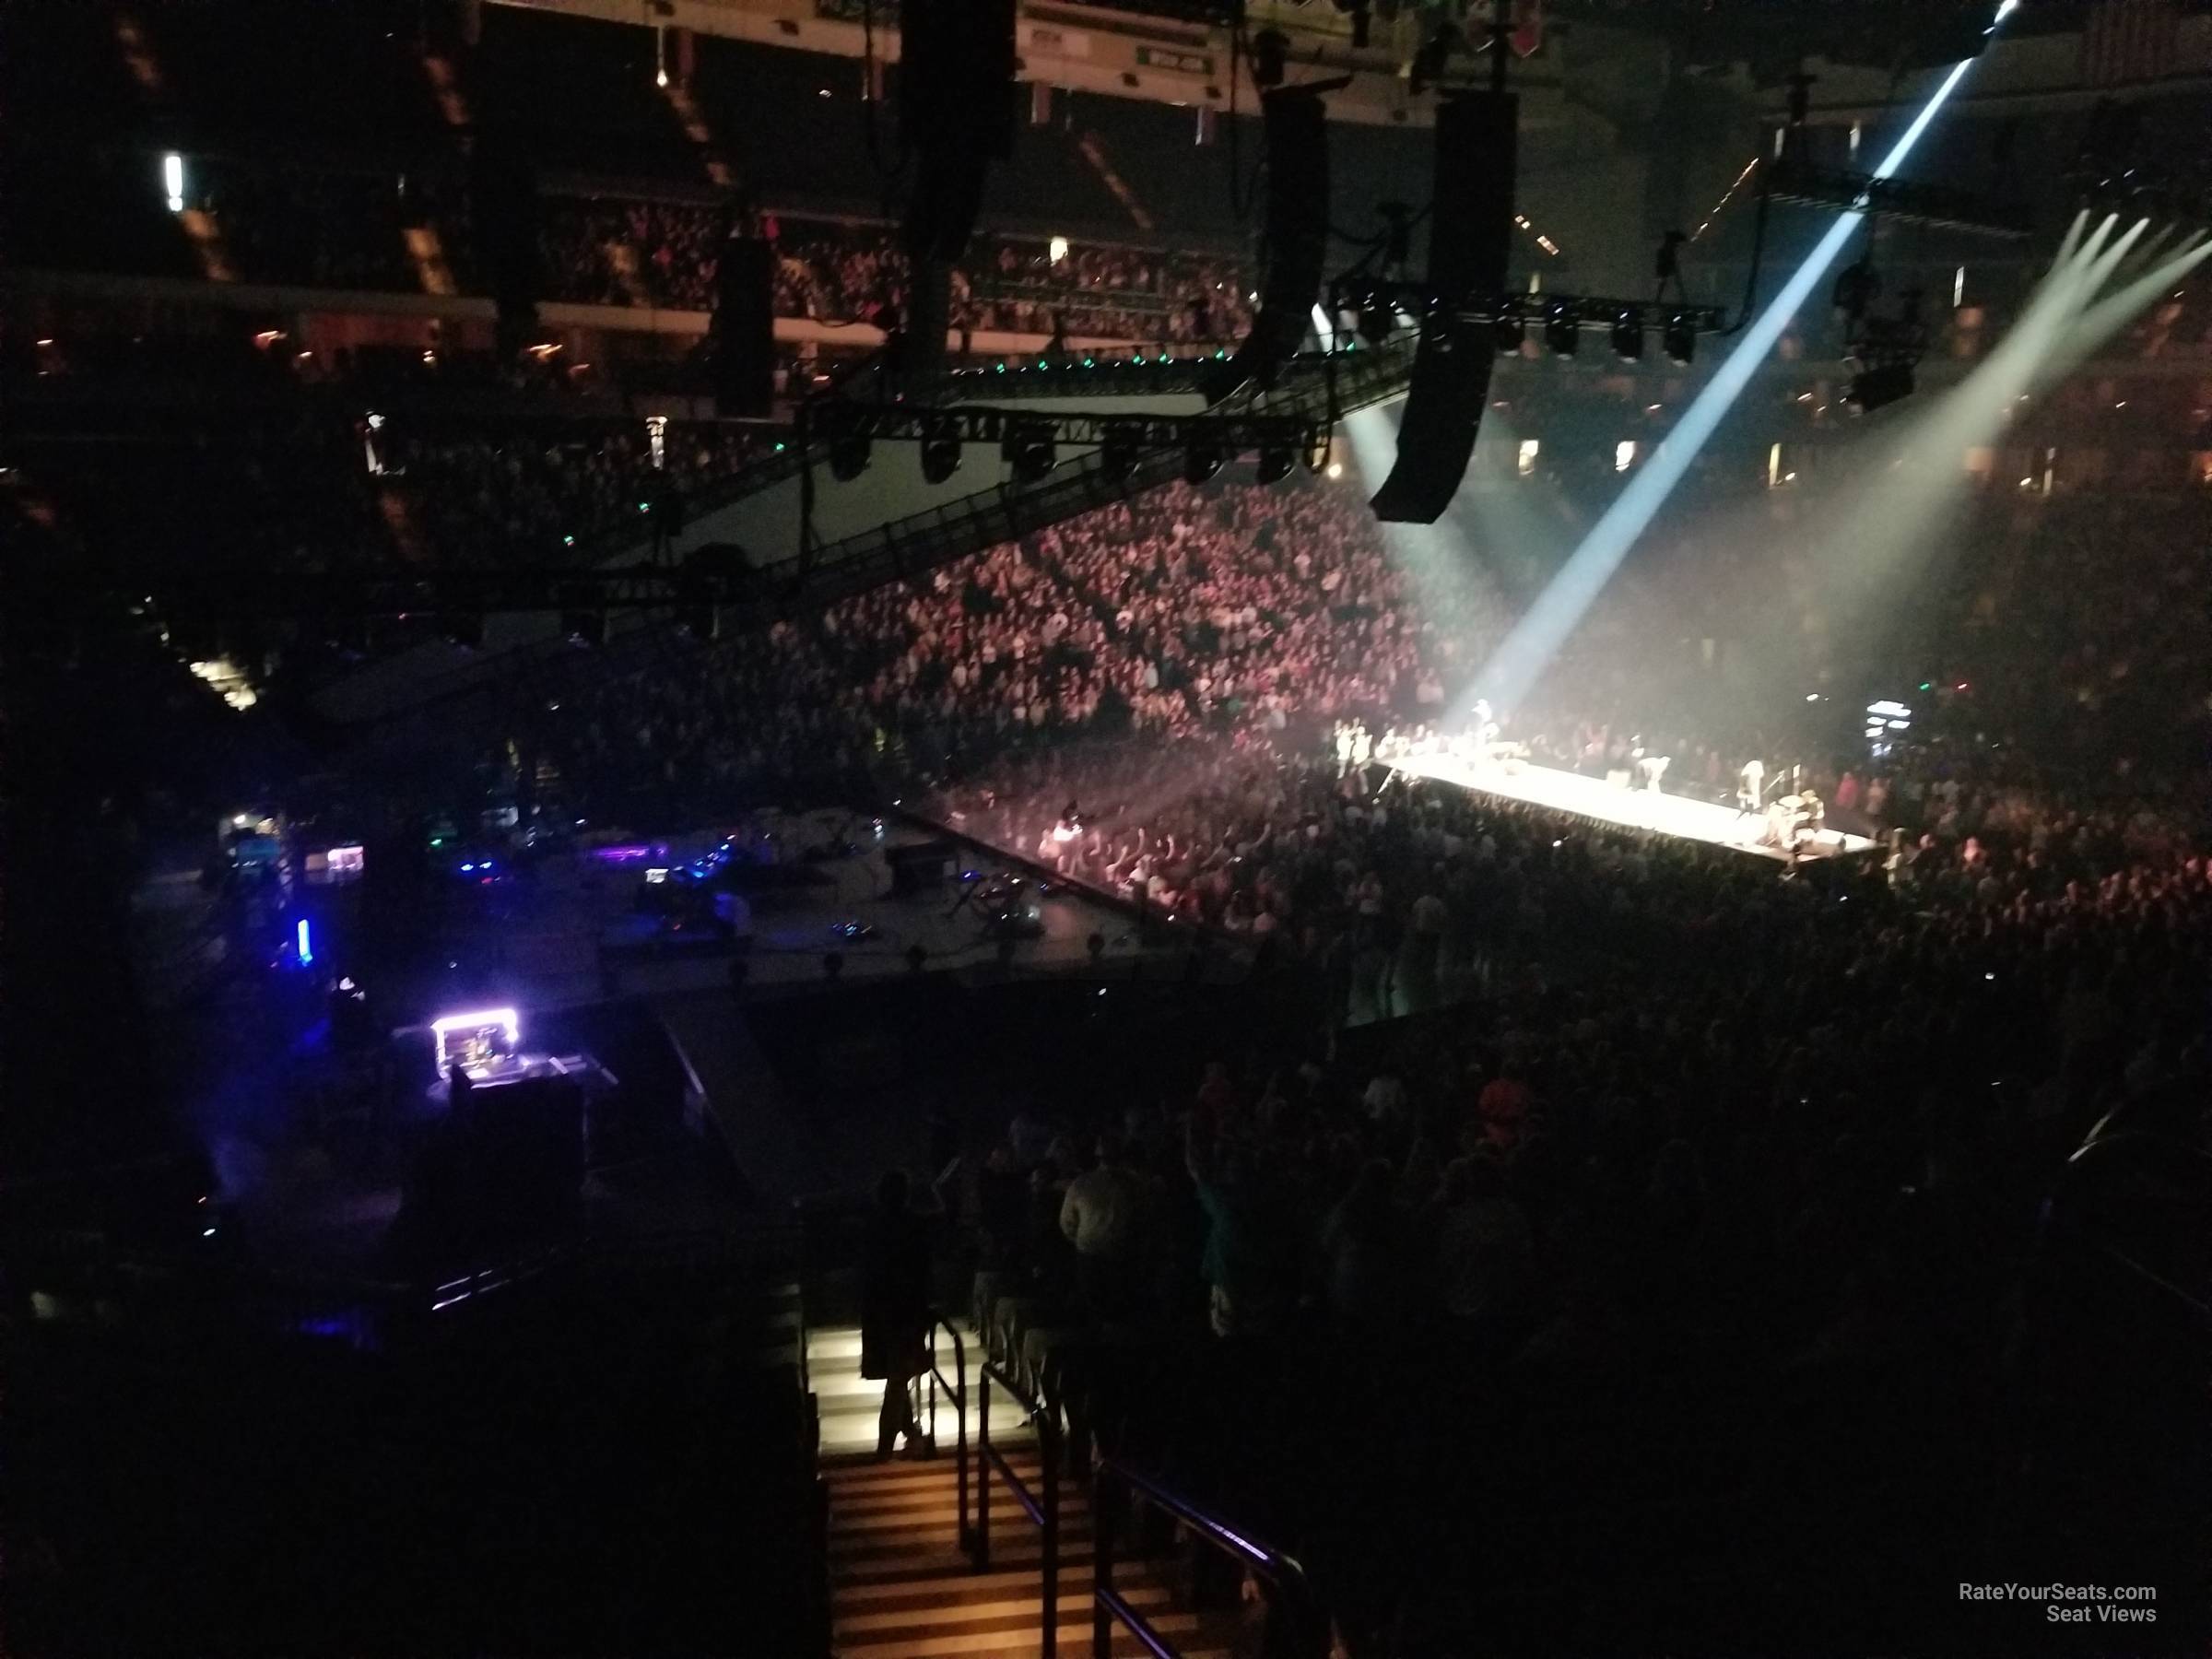 section 120, row 26 seat view  for concert - xcel energy center